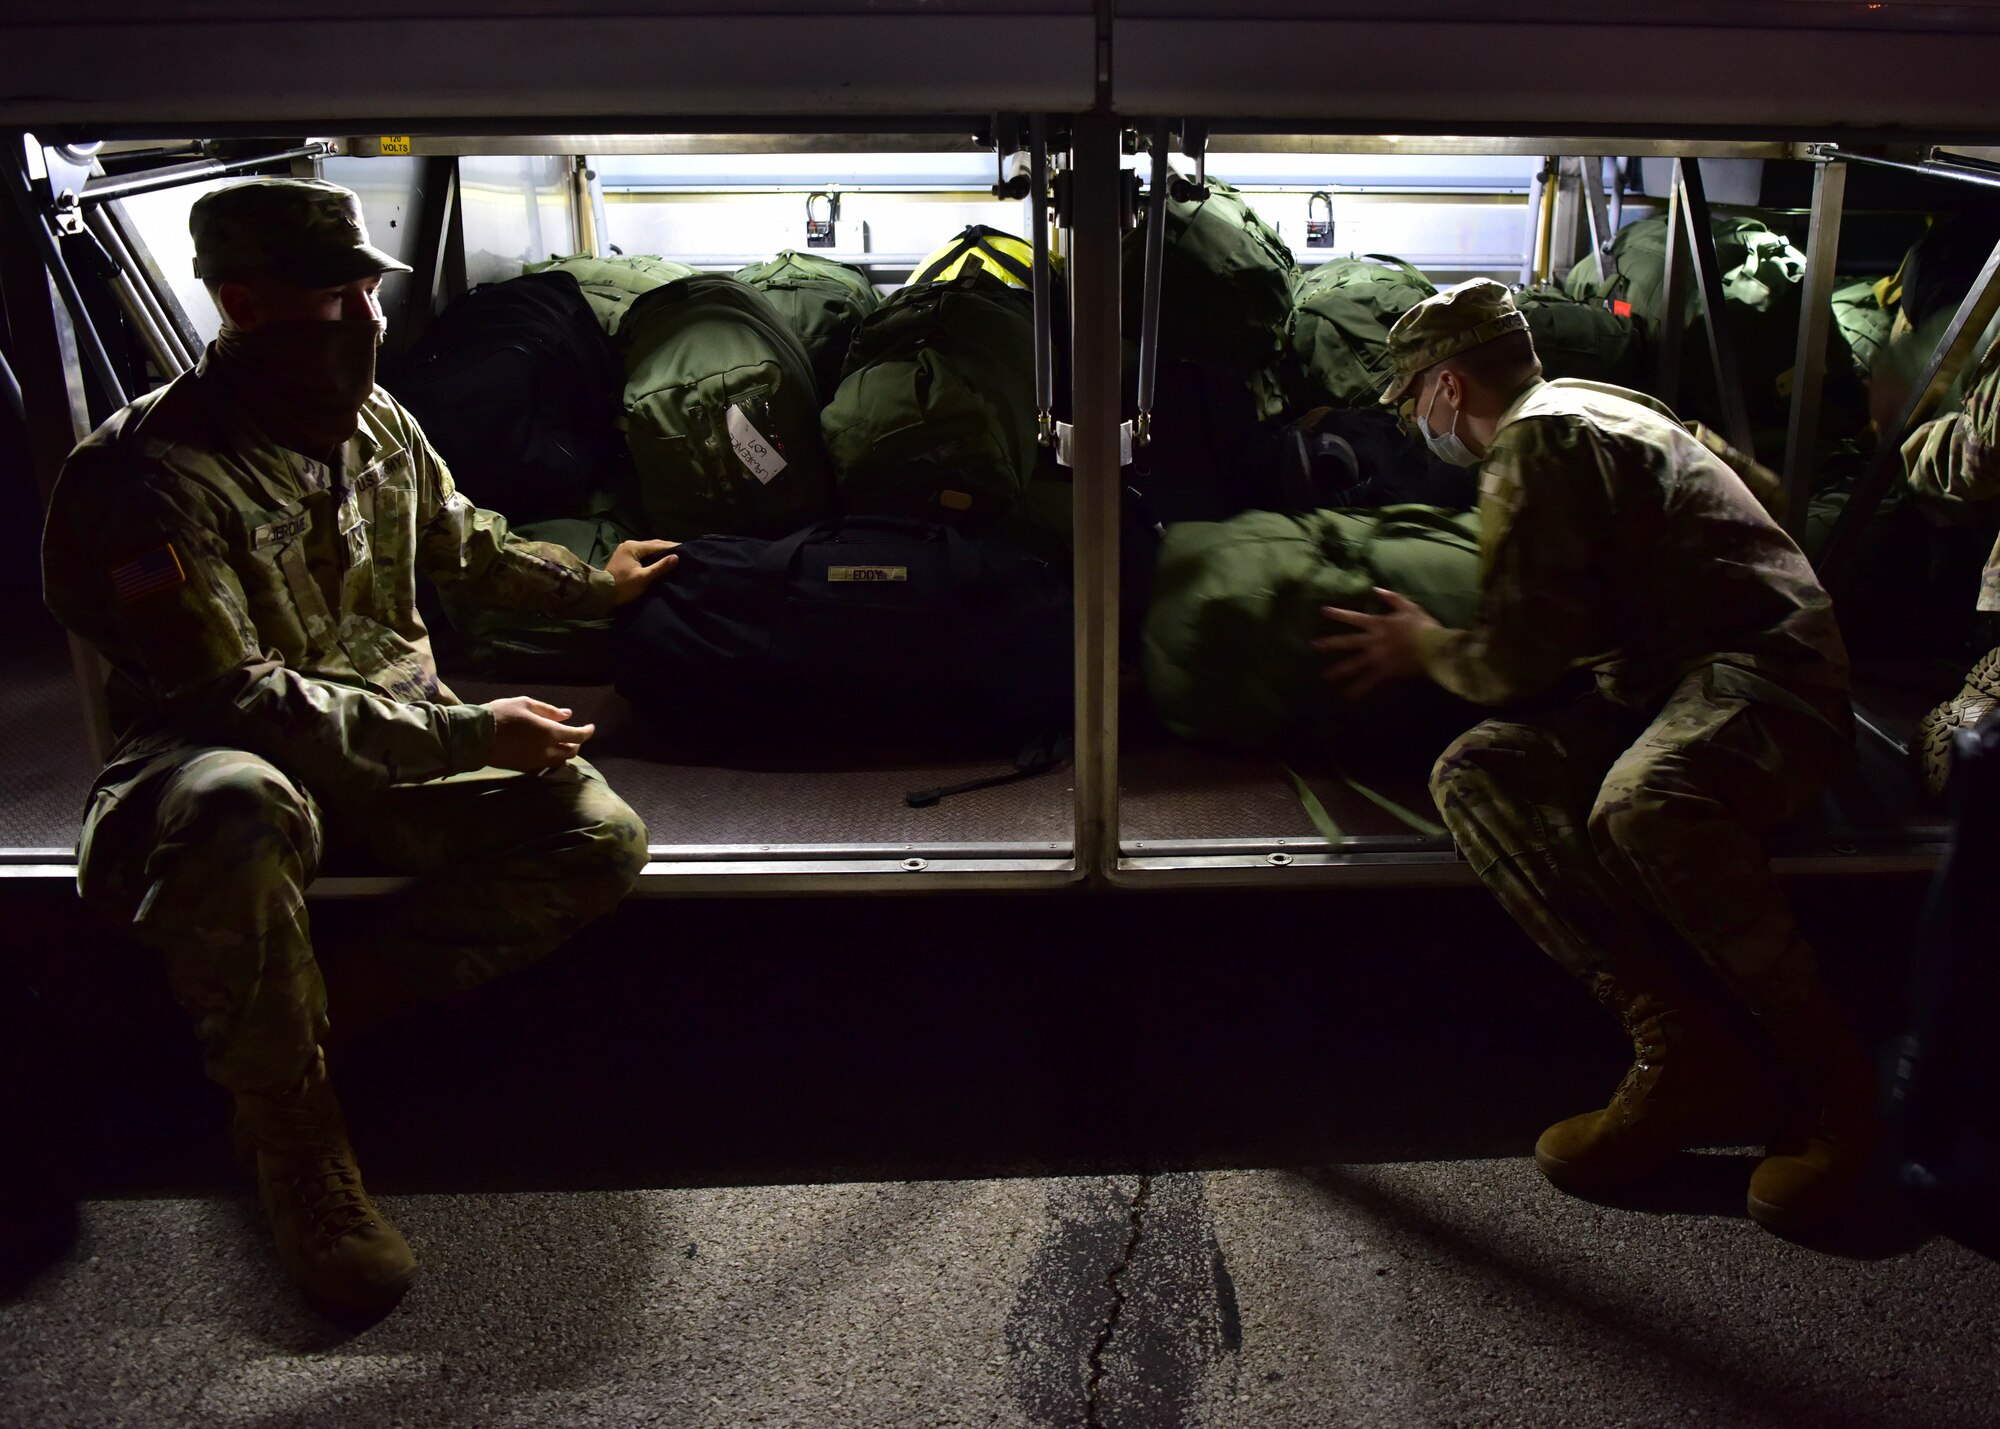 Soldiers with the 344th Military Intelligence Battalion load their bags onto a bus on Goodfellow Air Force Base, Texas, May 5, 2020. The Soldiers used buses instead of the normal airline travel to maintain proper precautions during the COVID-19 restrictions. (U.S. Air Force photo by Staff Sgt. Chad Warren)